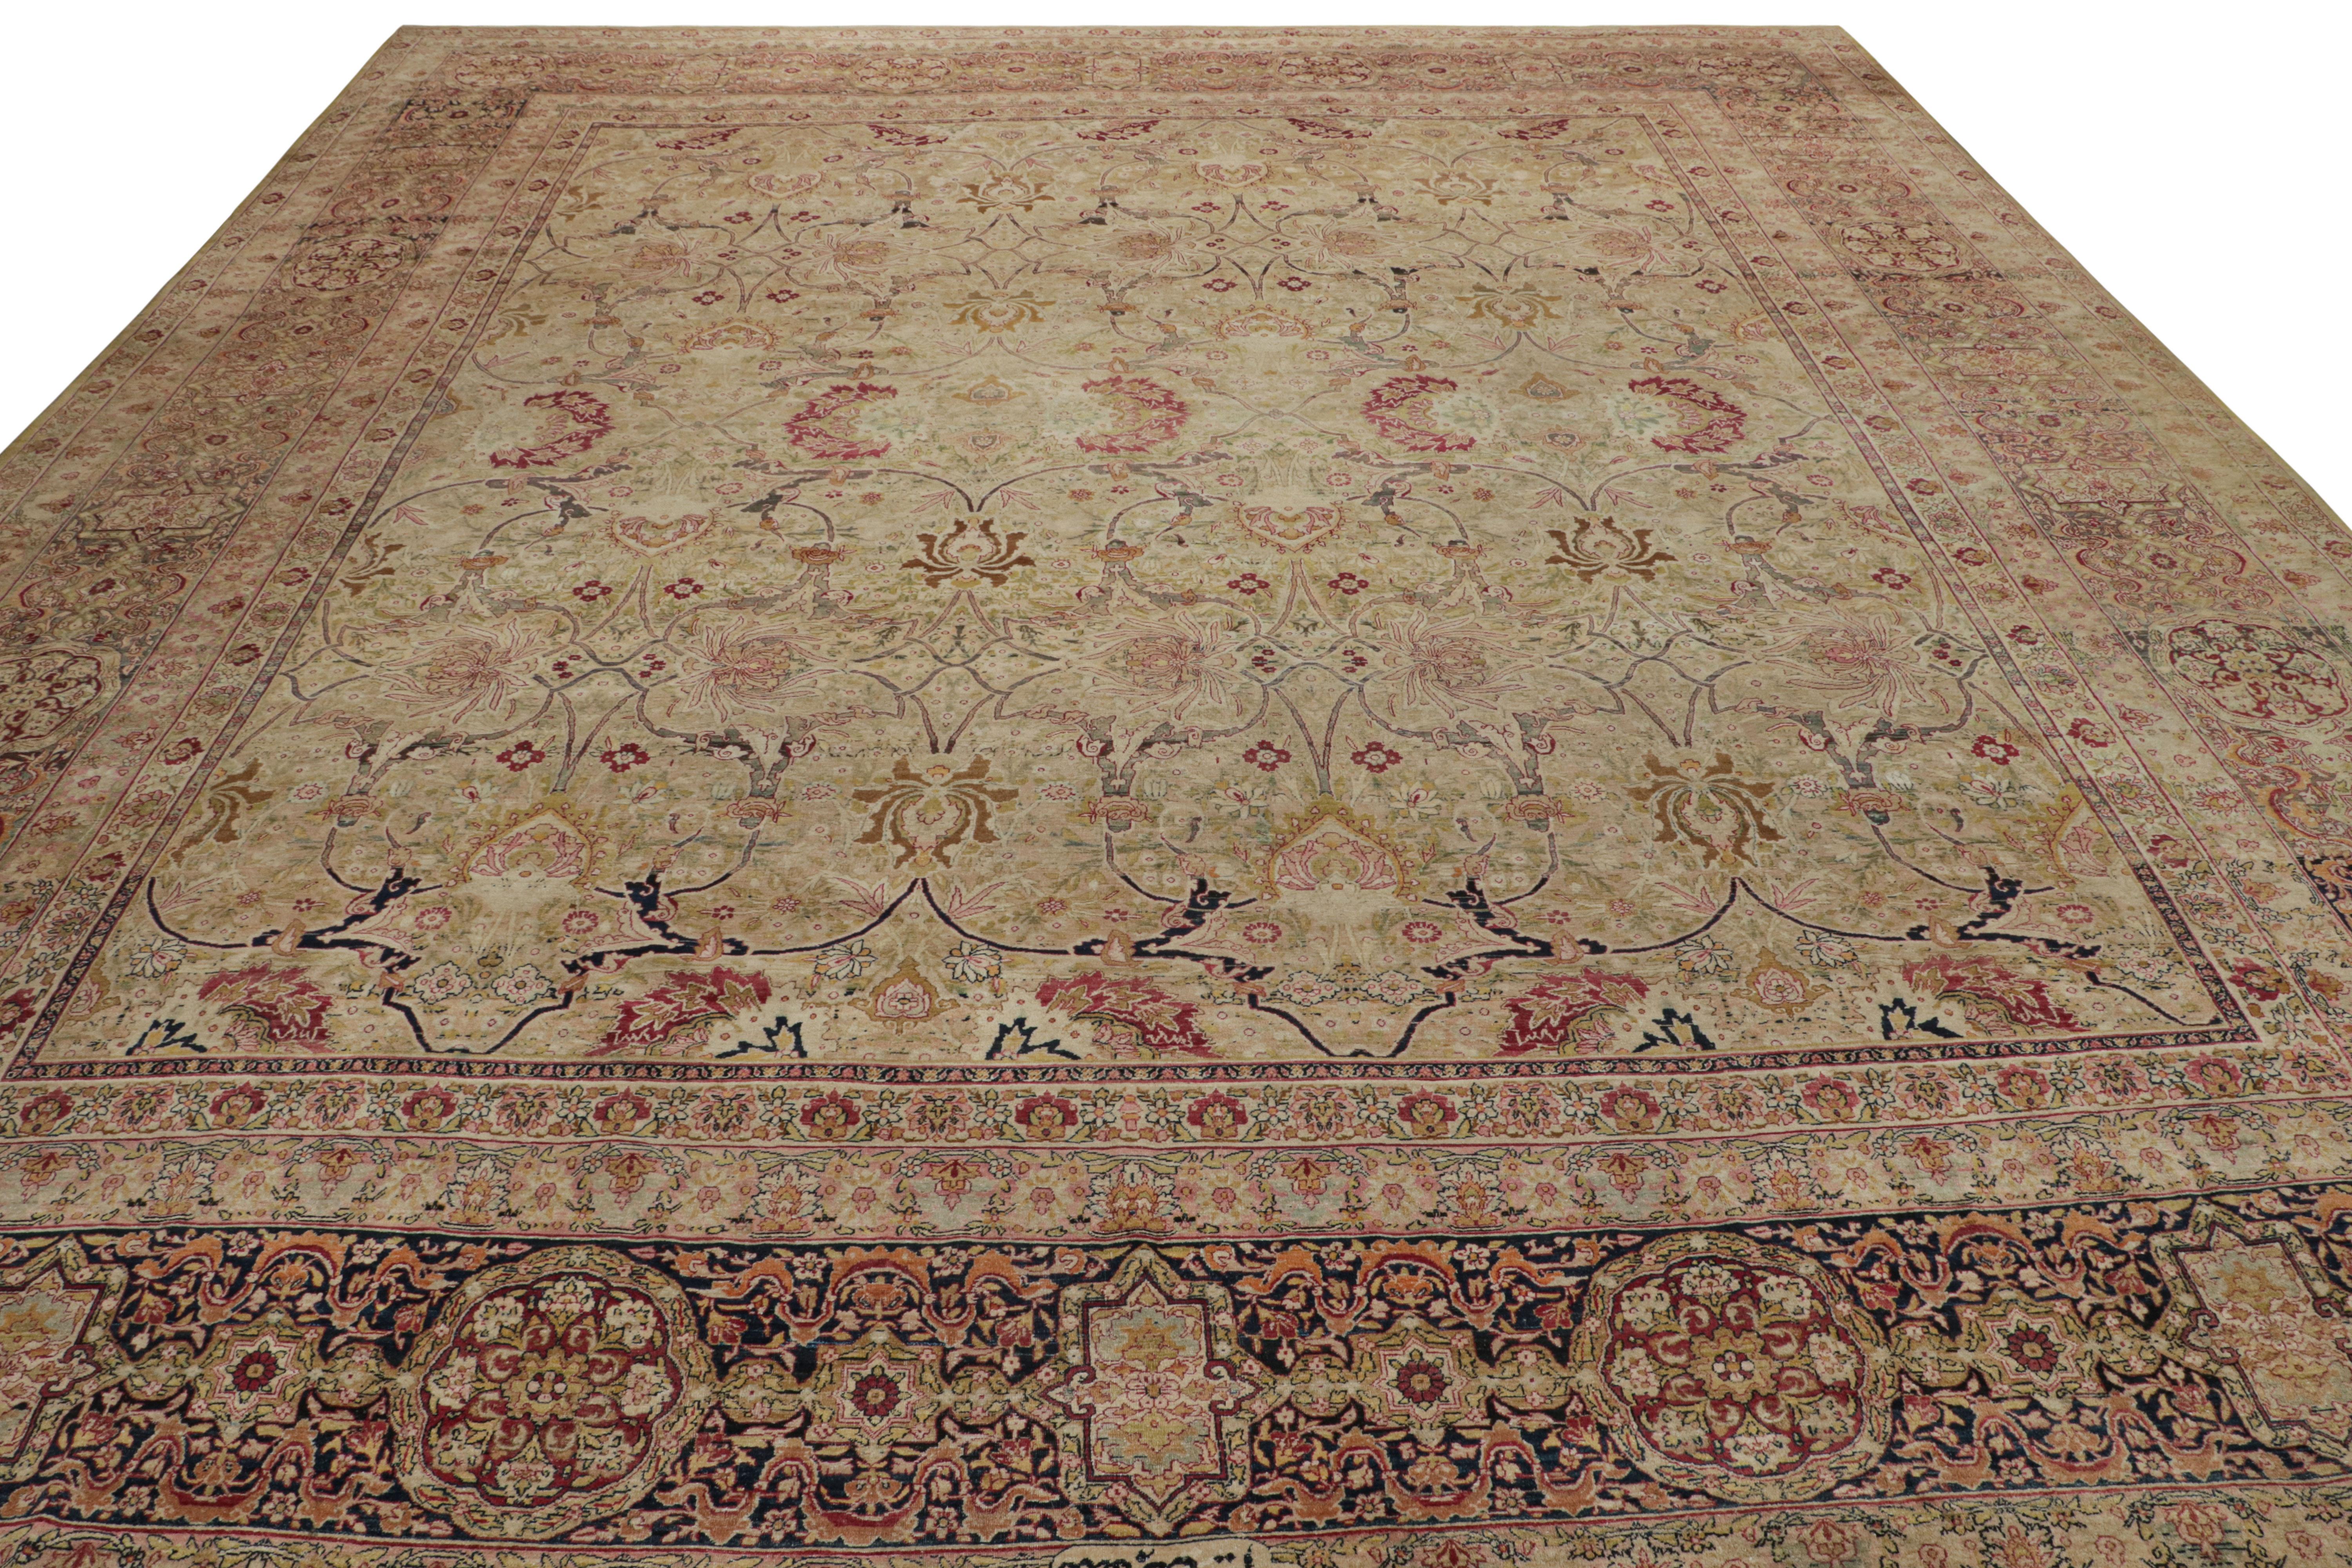 Early 20th Century Antique Persian Kerman Lavar Rug with Floral Patterns, from Rug & Kilim For Sale